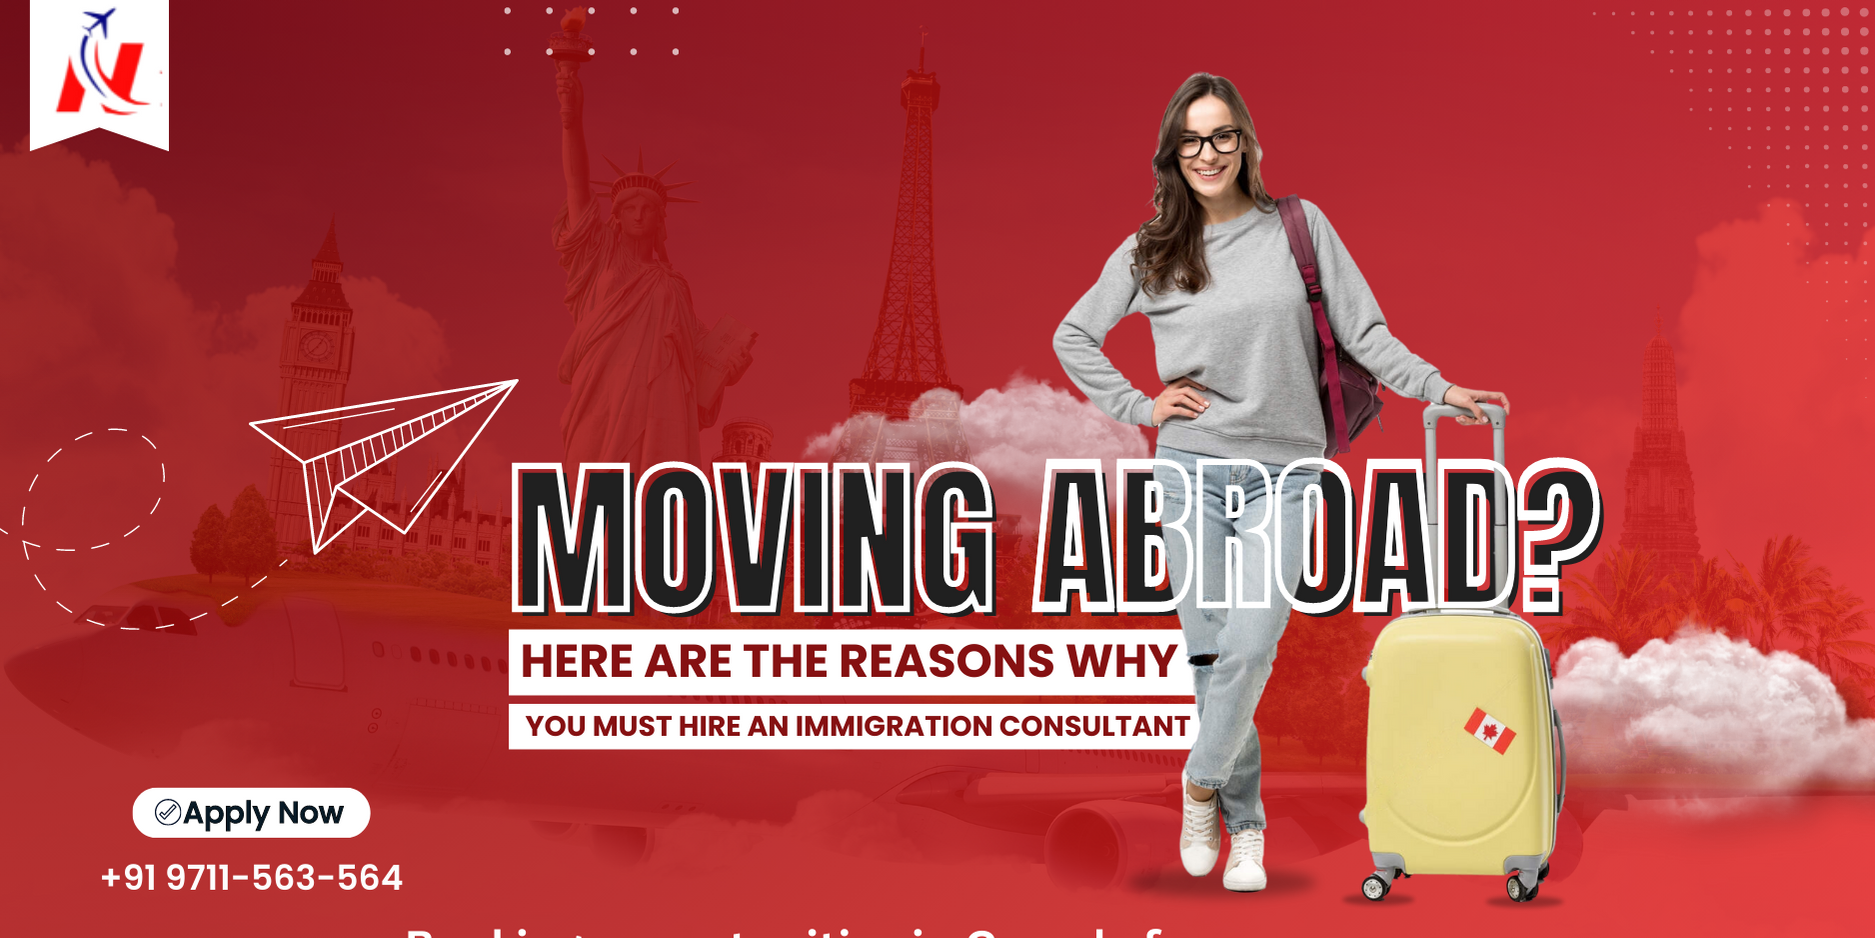 Moving abroad? Here are the reasons why you must hire an immigration consultant